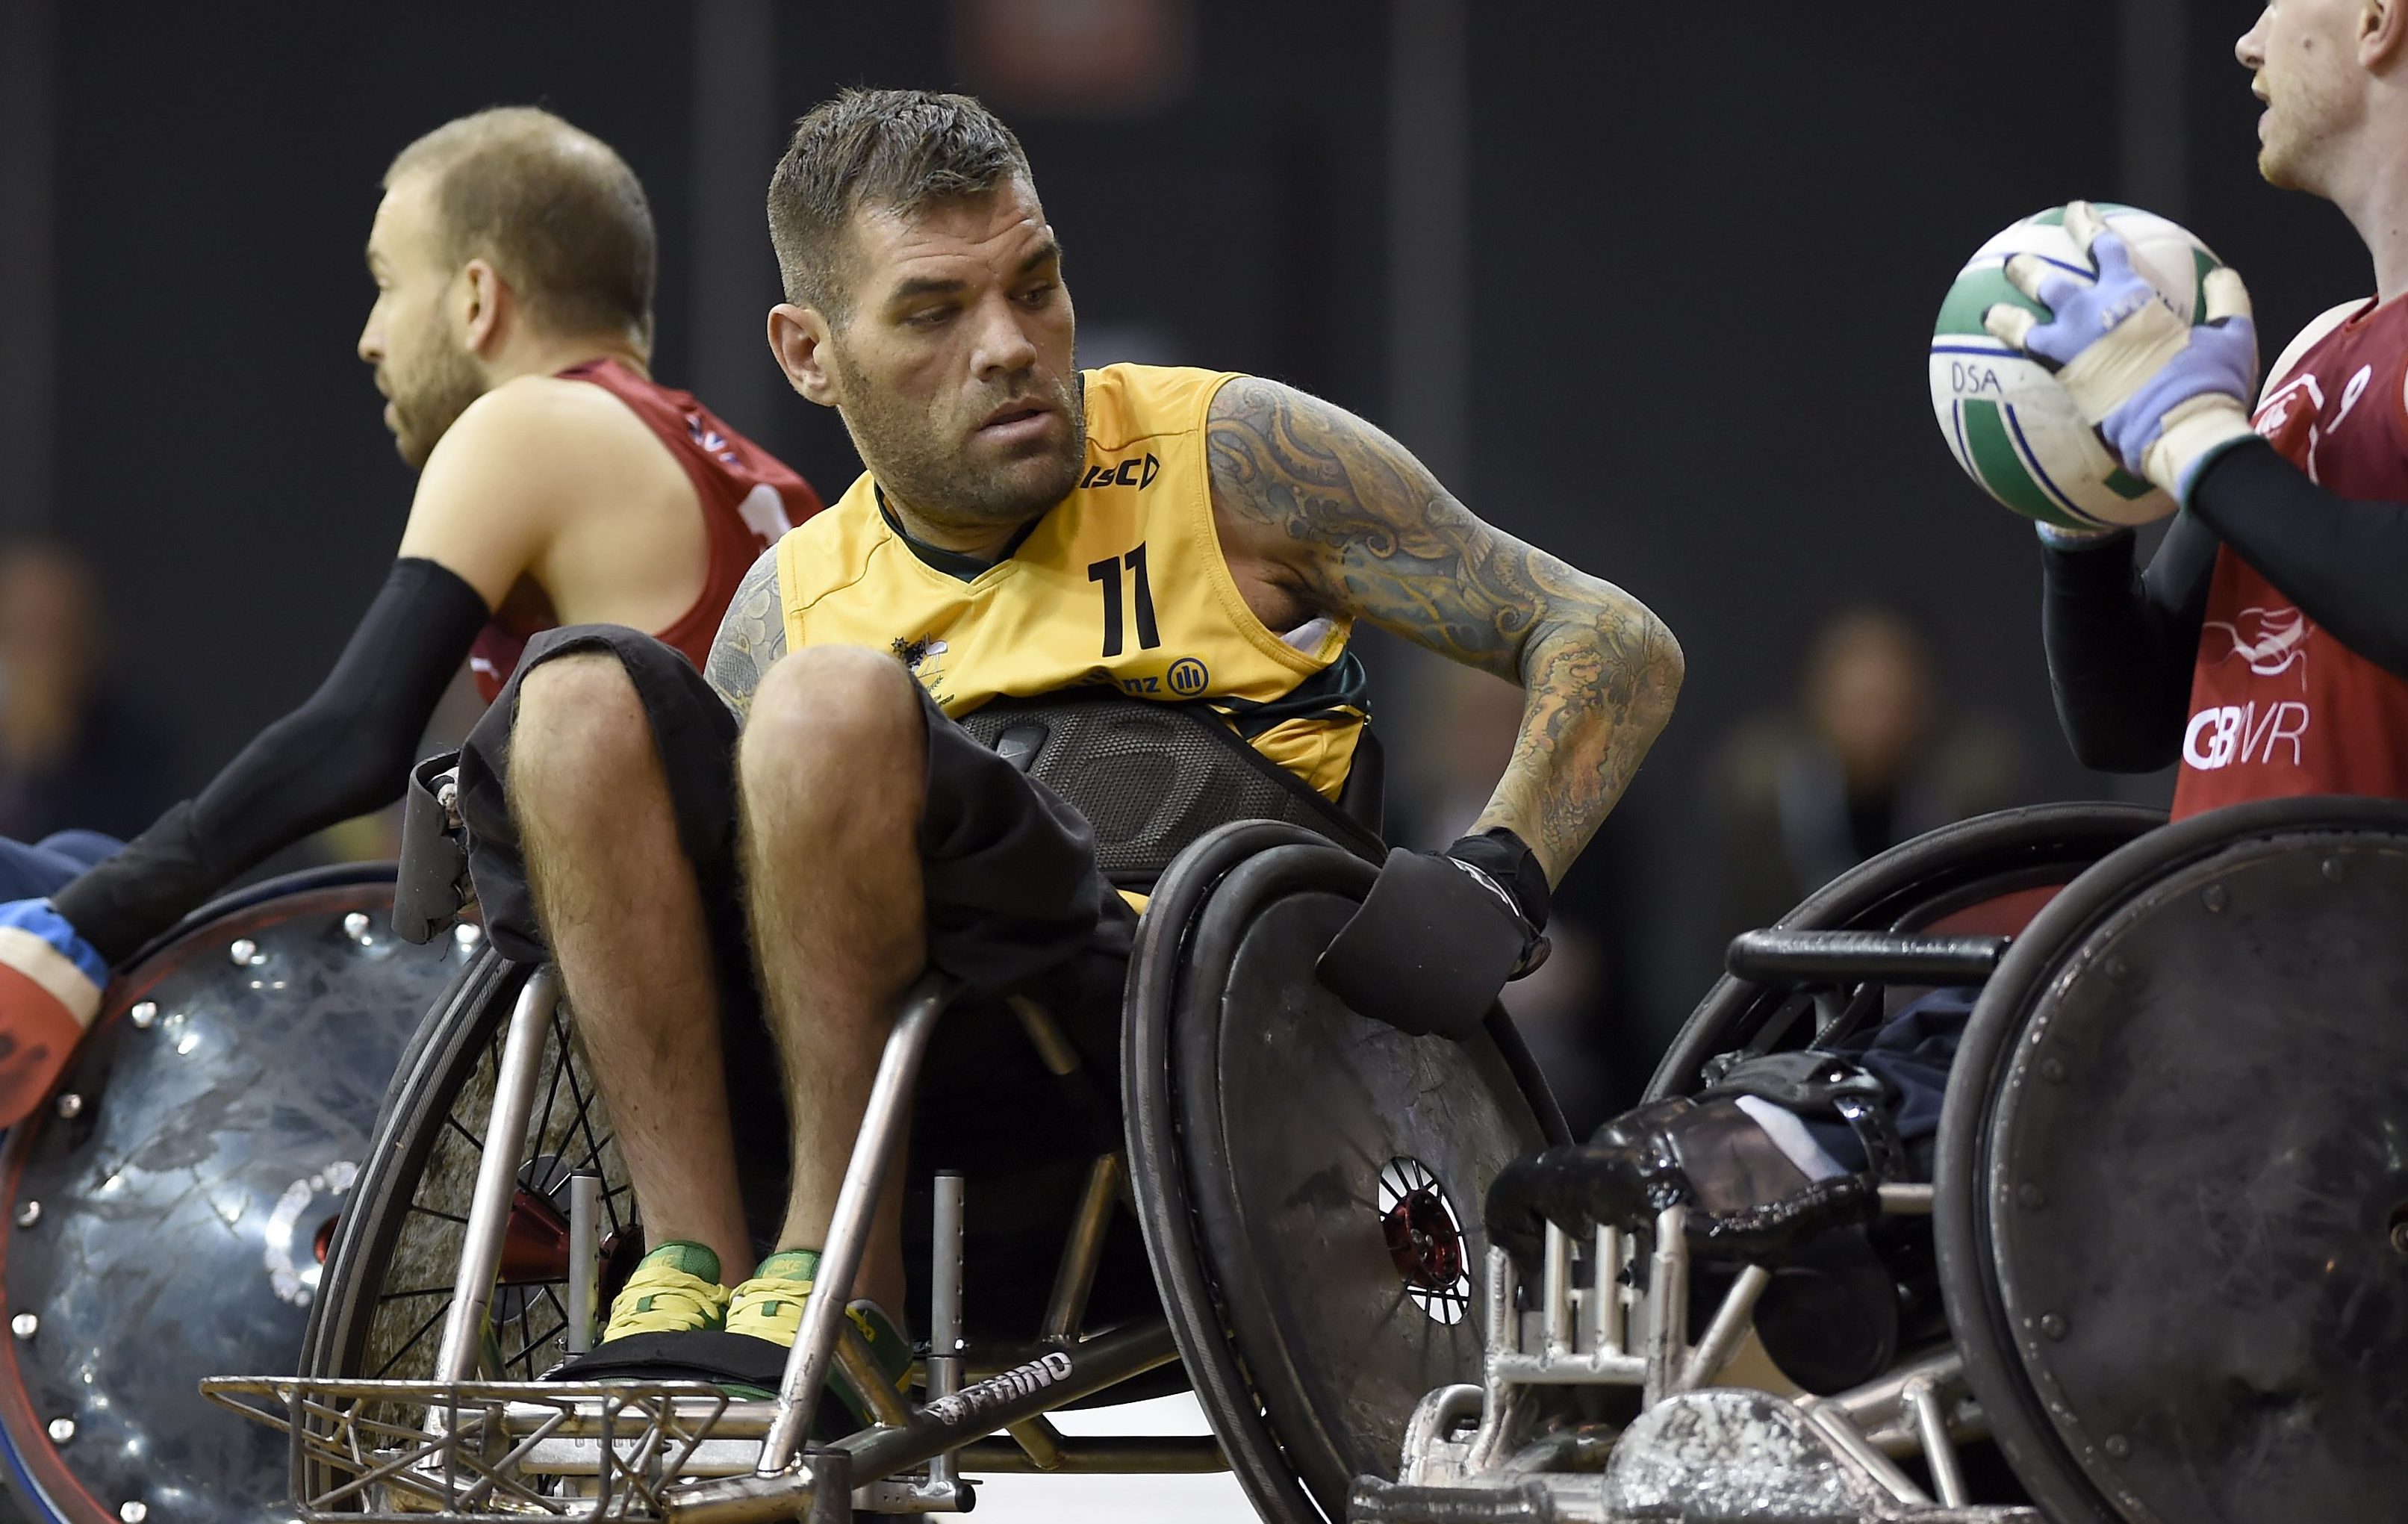 Steelers legend retires from wheelchair rugby